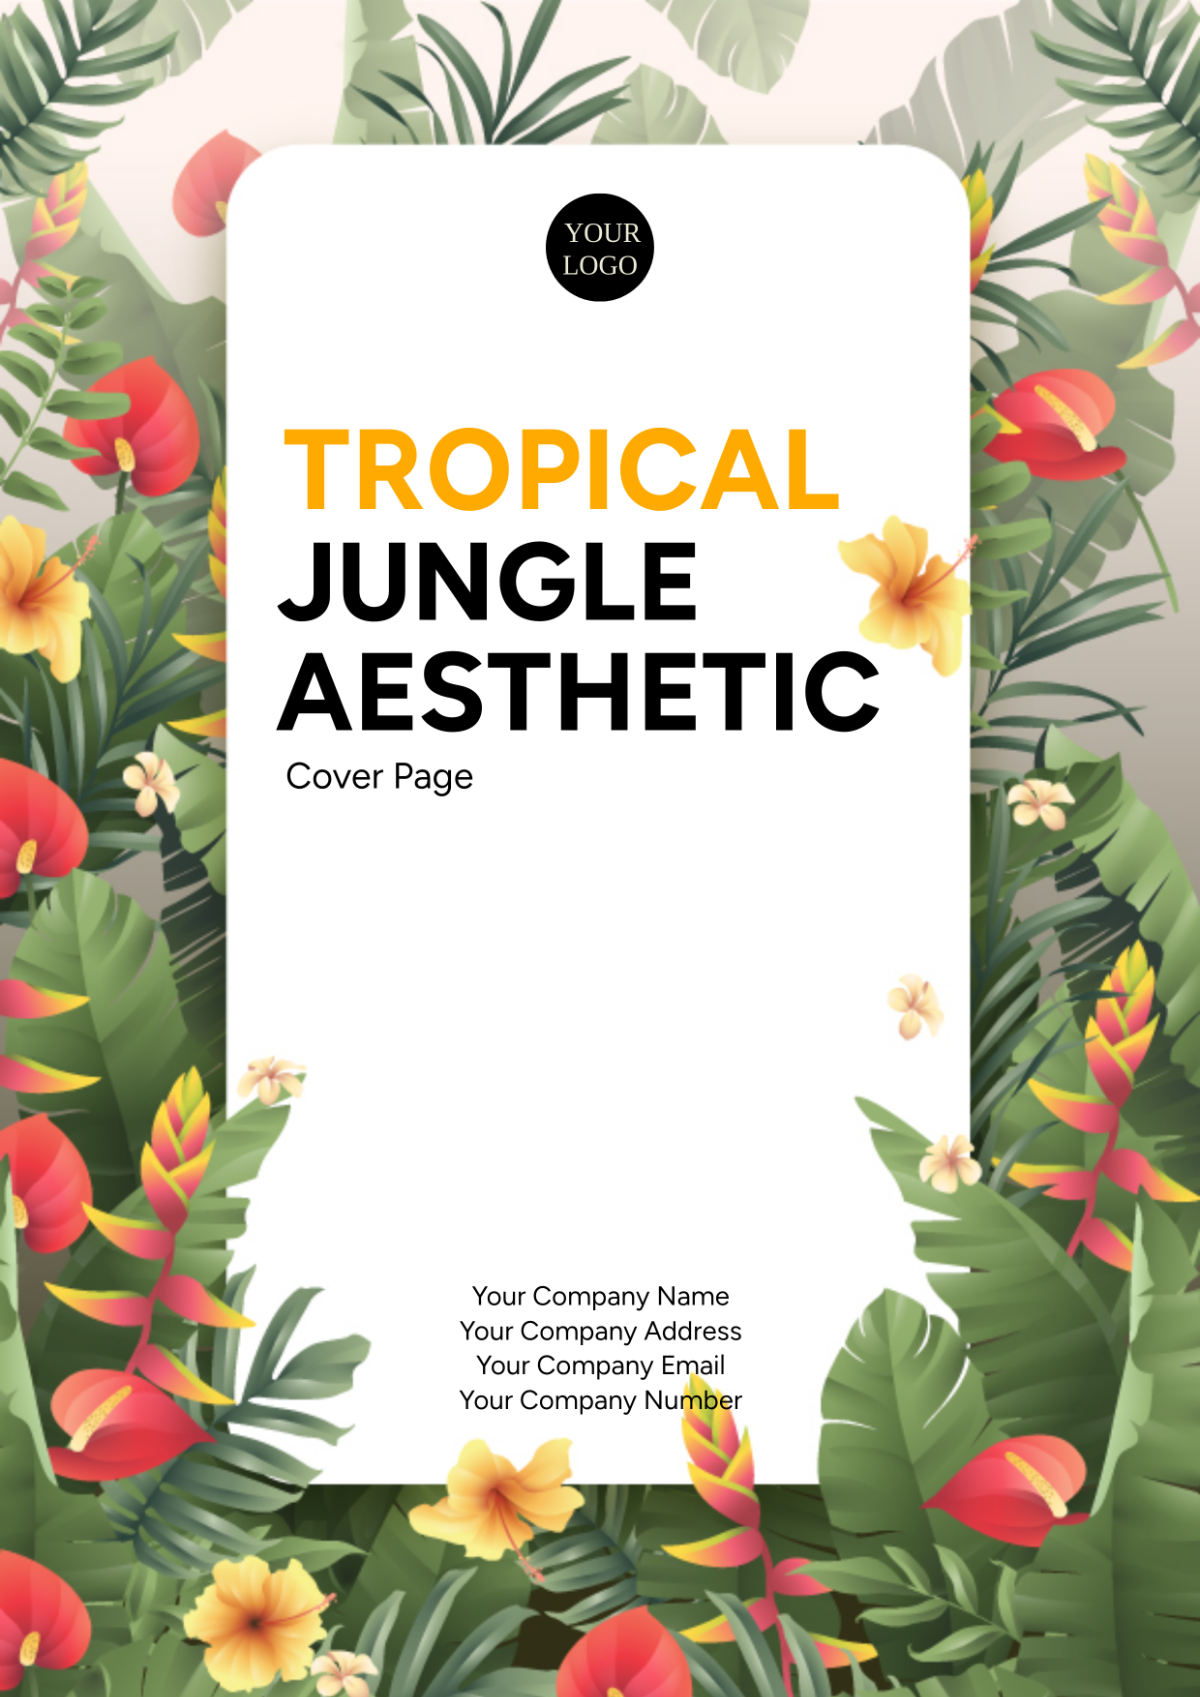 Tropical Jungle Aesthetic Cover Page